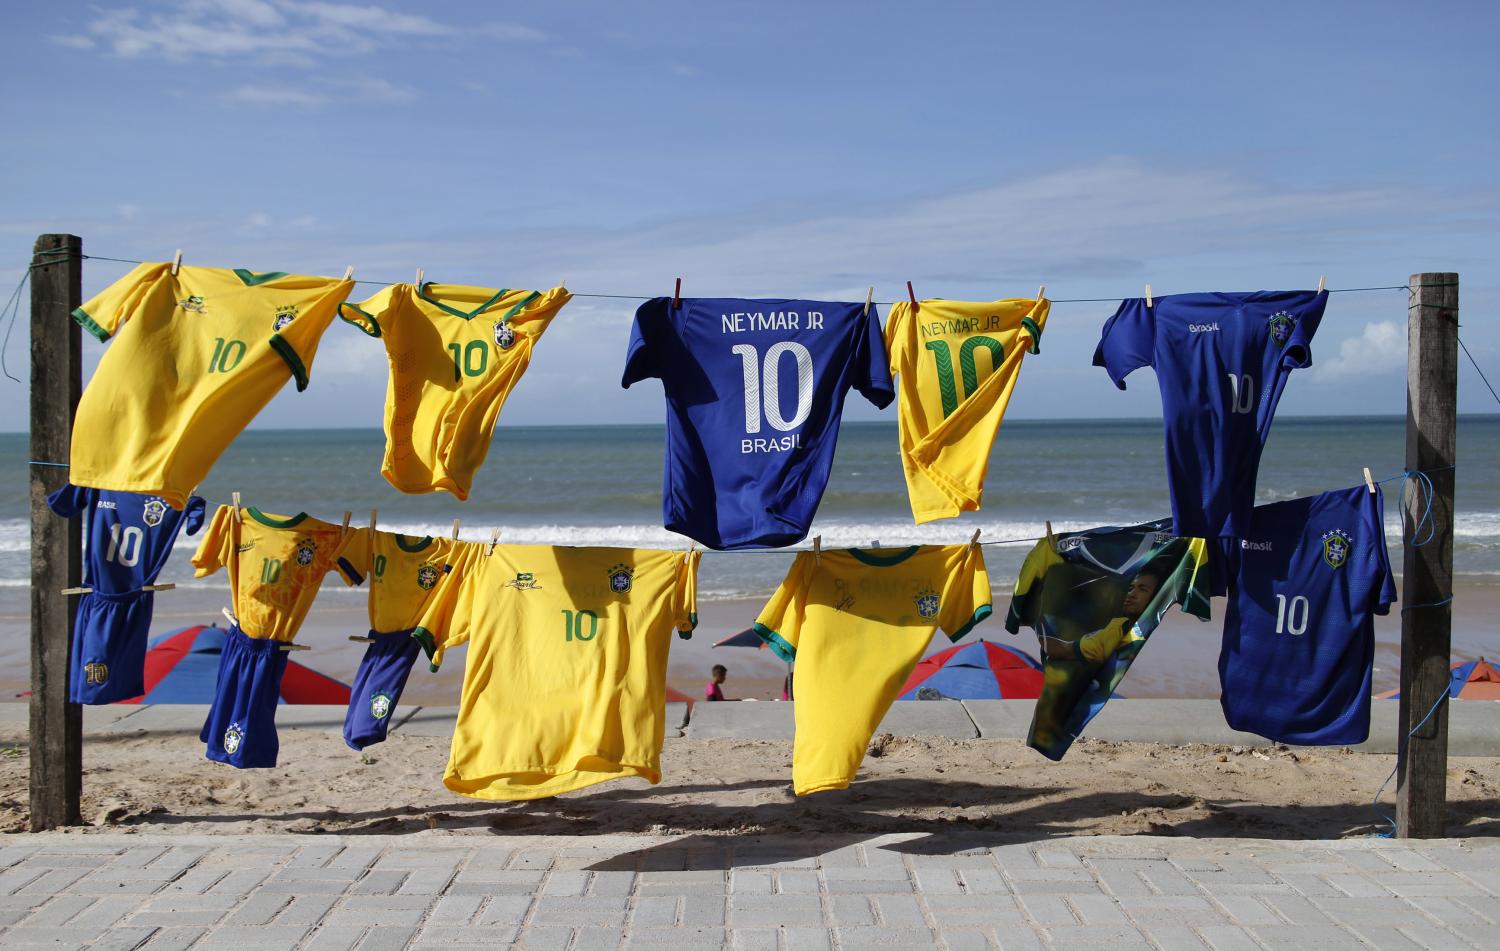 Brazilian soccer jerseys with the number ten are displayed for sale at a beach in Natal, June 20, 2014. In a project called "On The Sidelines" Reuters photographers share pictures showing their own quirky and creative view of the 2014 World Cup in Brazil.   REUTERS/Toru Hanai (BRAZIL - Tags: SPORT SOCCER WORLD CUP SOCIETY)